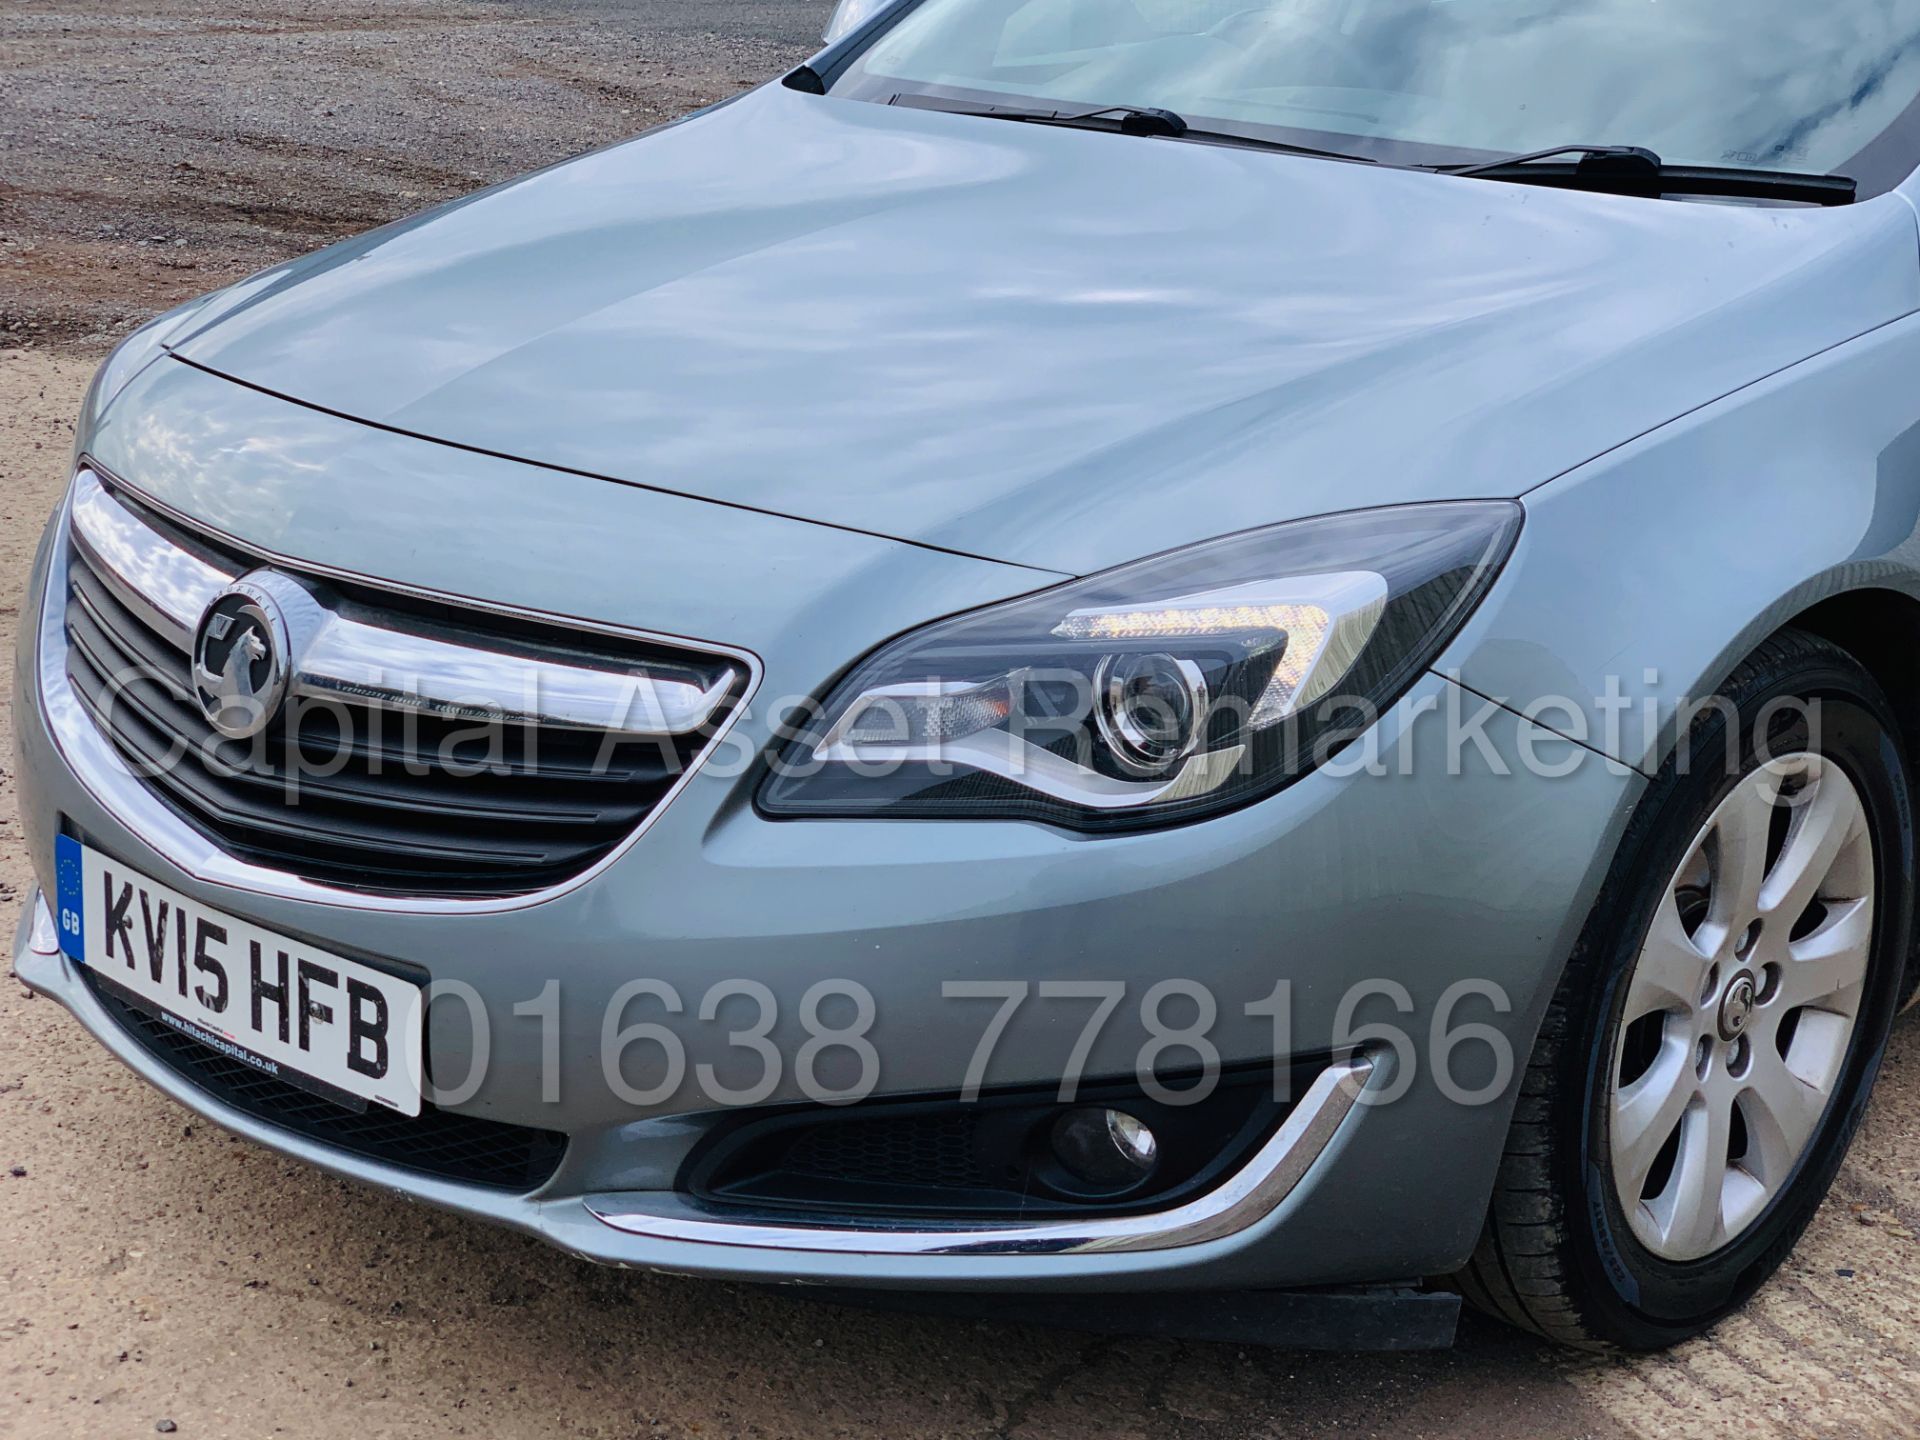 (On Sale) VAUXHALL INSIGNIA *SRI EDITION* (2015) '2.0 CDTI - STOP/START - 6 SPEED' (1 OWNER) - Image 14 of 40